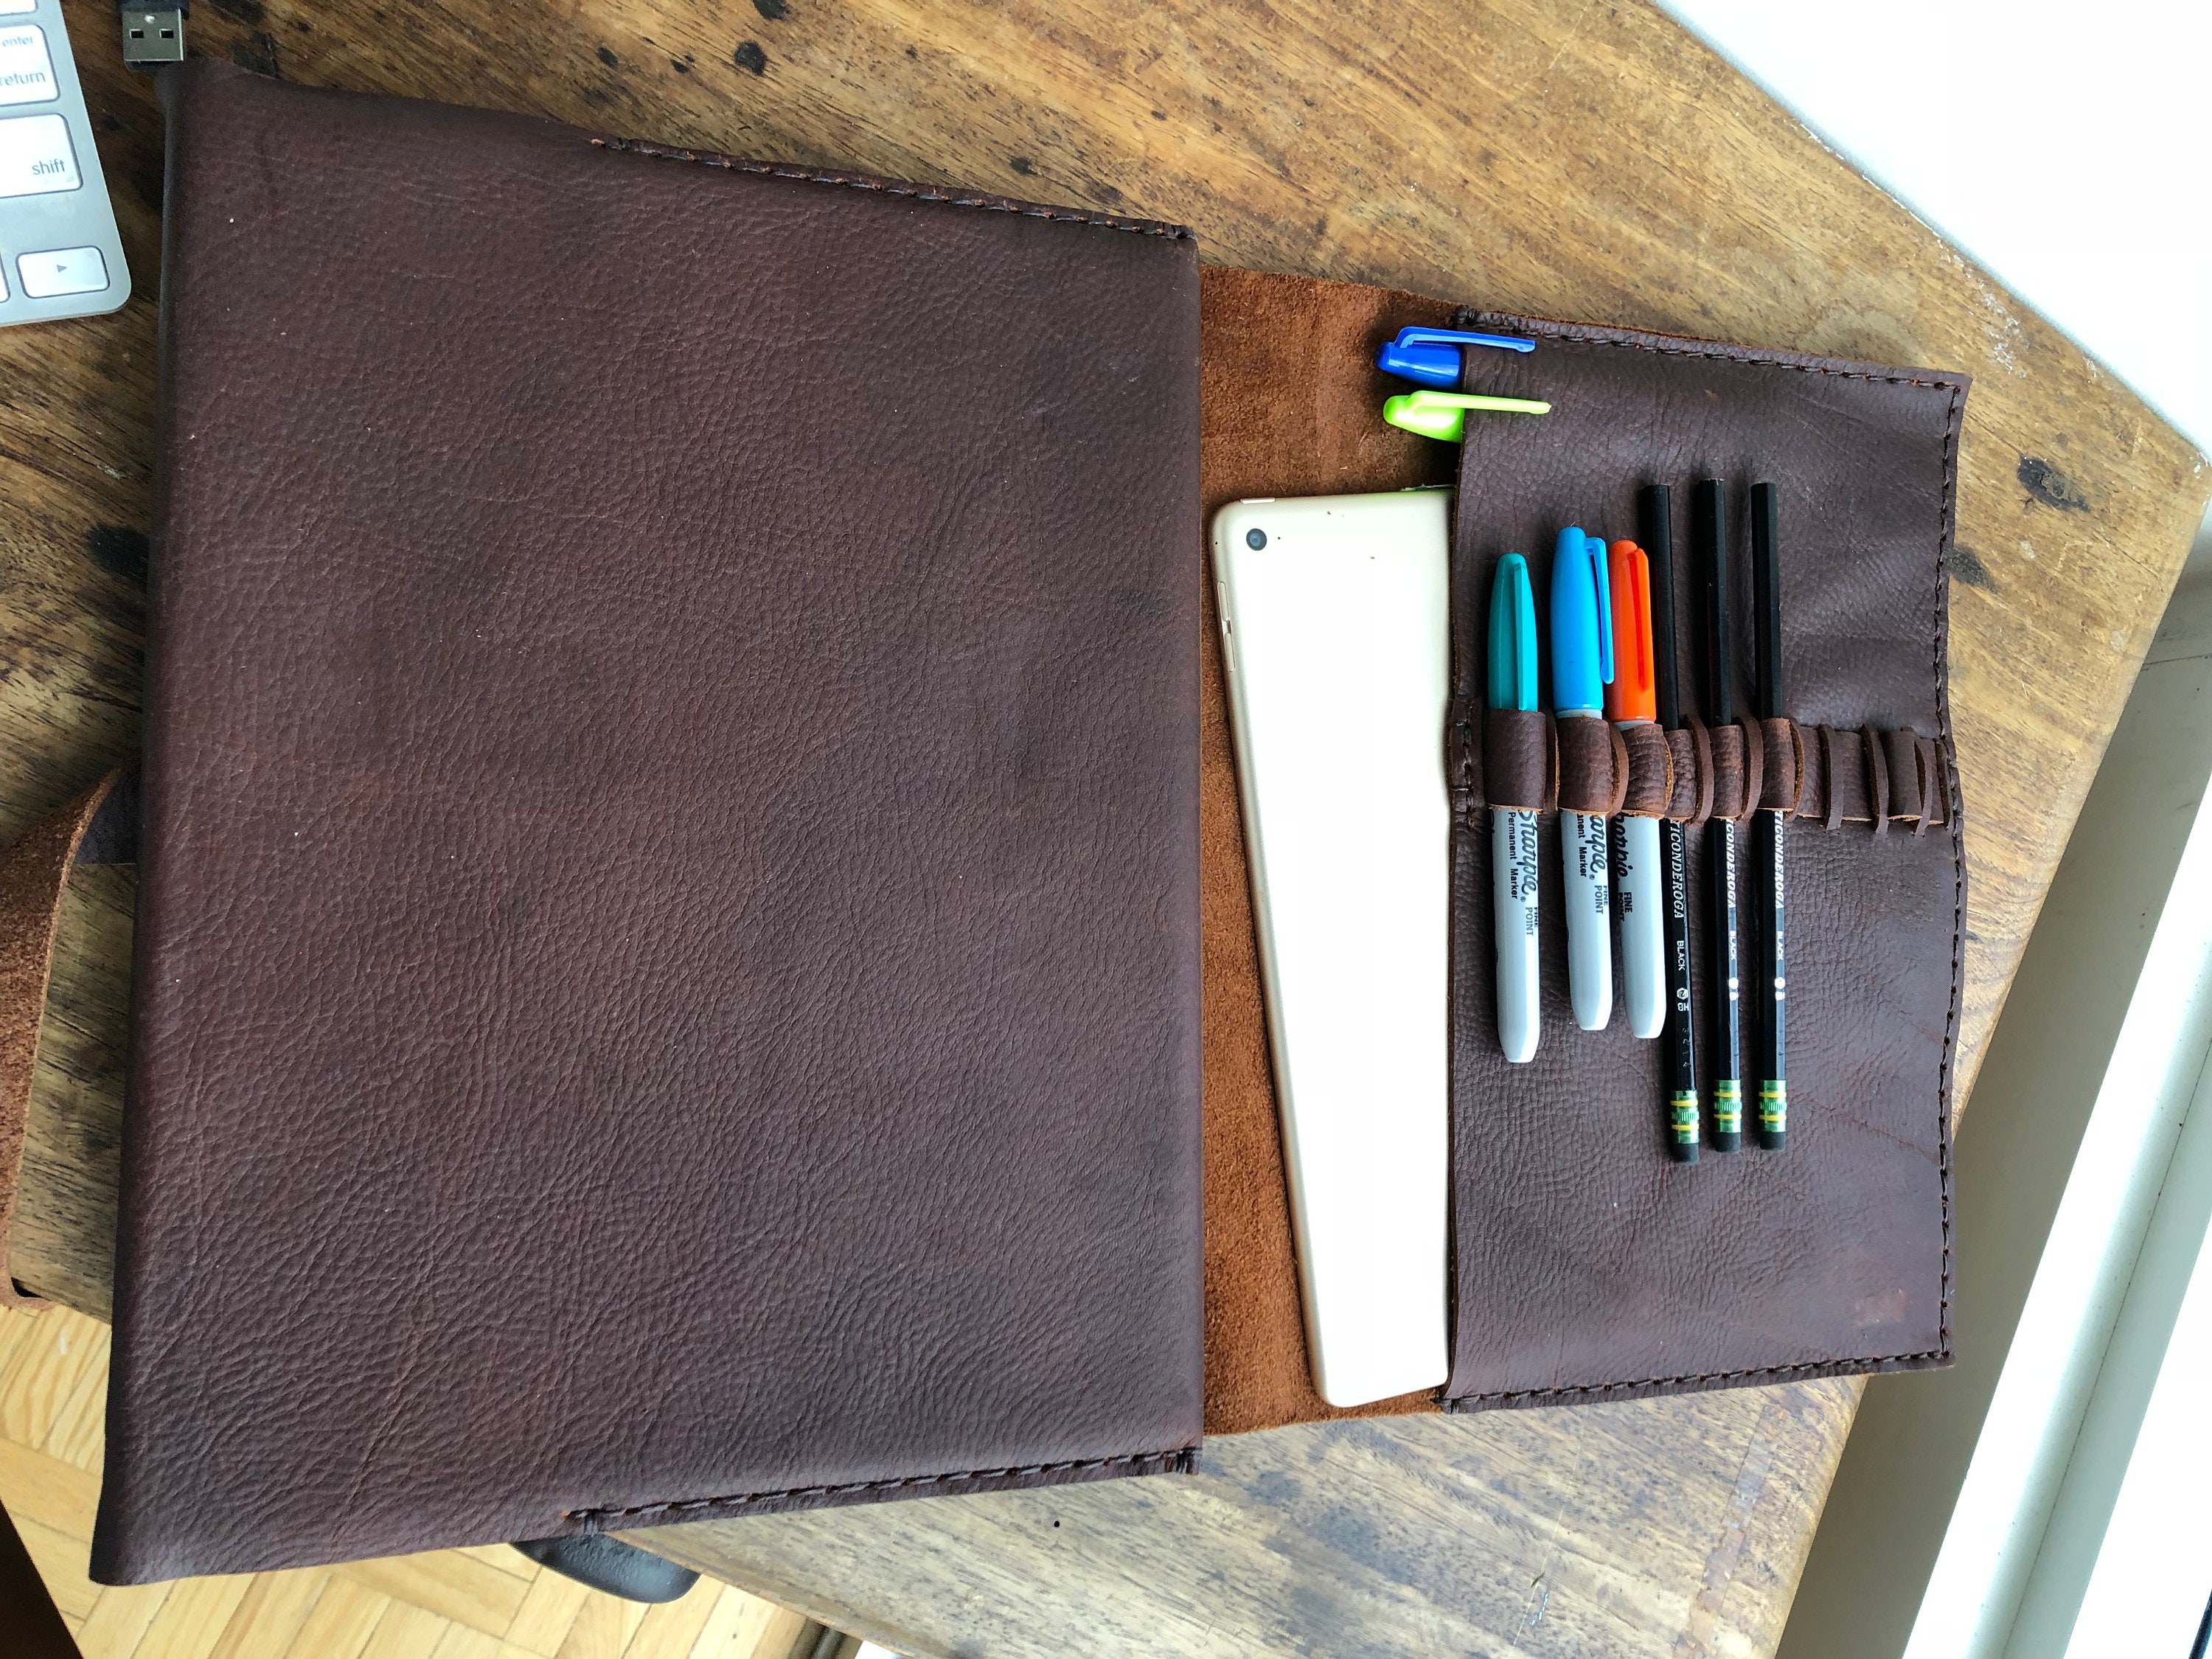 Refillable B5 Leather Cover Sketchbook – LeatherNeo